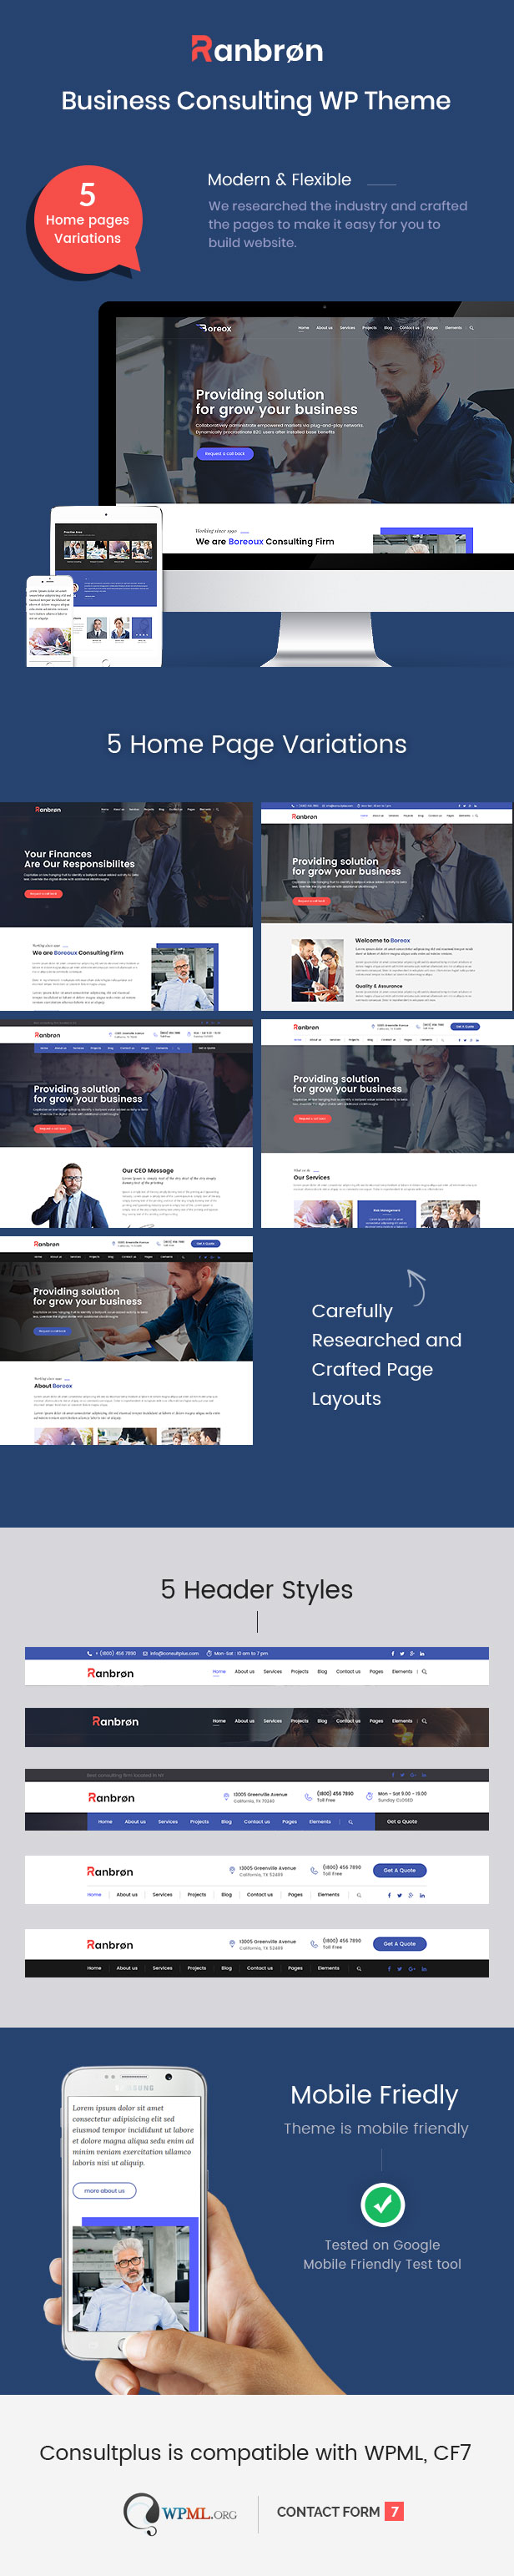 Ranbron - Business and Consulting WordPress Theme - 2